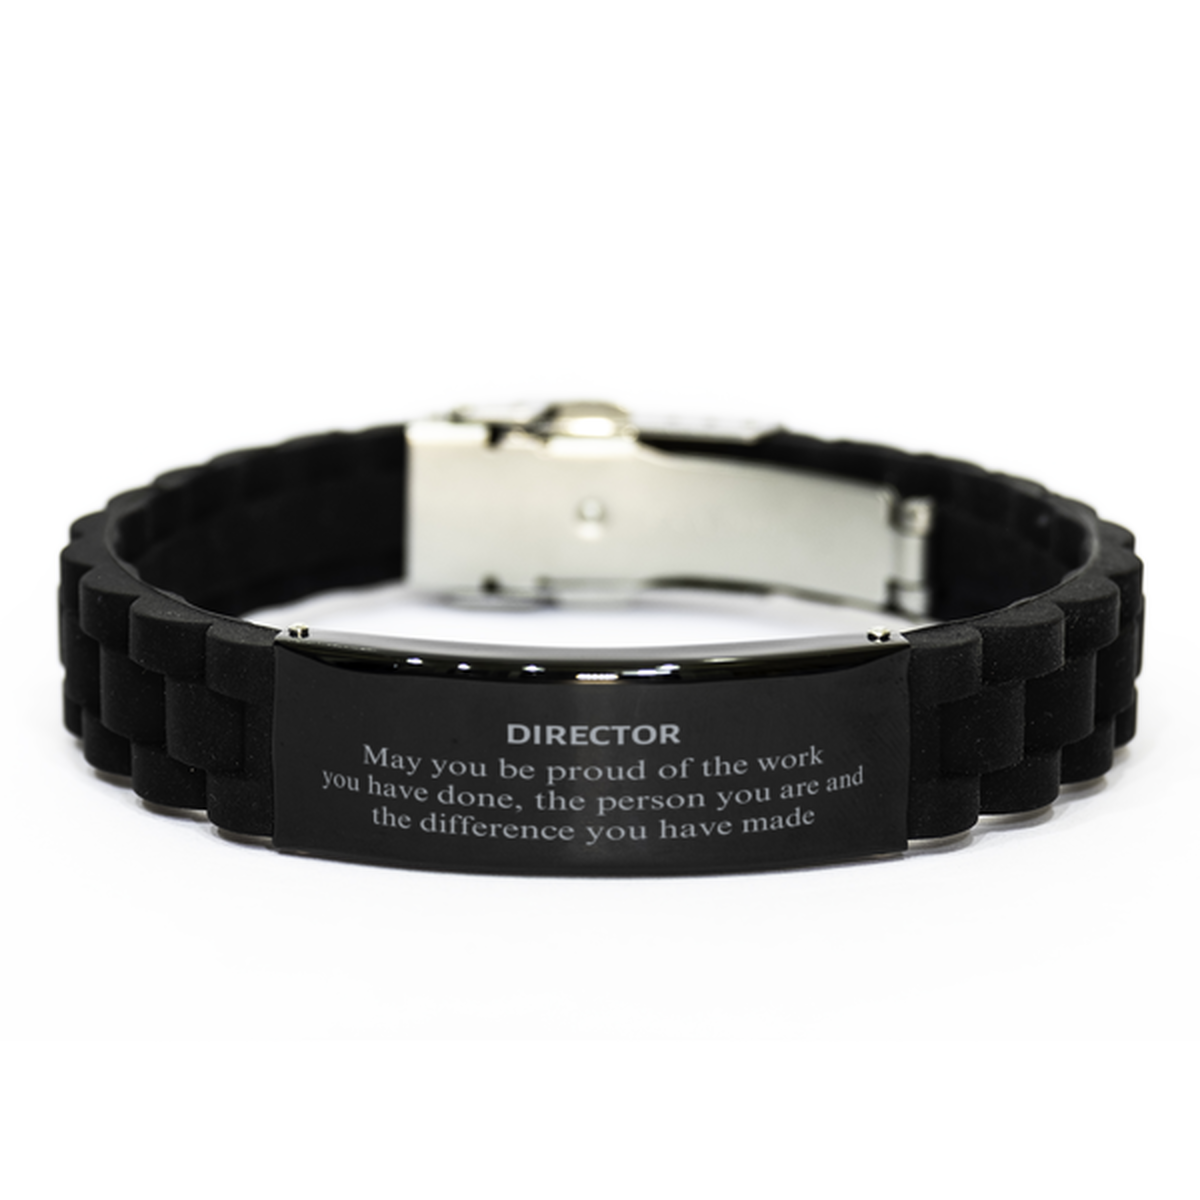 Director May you be proud of the work you have done, Retirement Director Black Glidelock Clasp Bracelet for Colleague Appreciation Gifts Amazing for Director